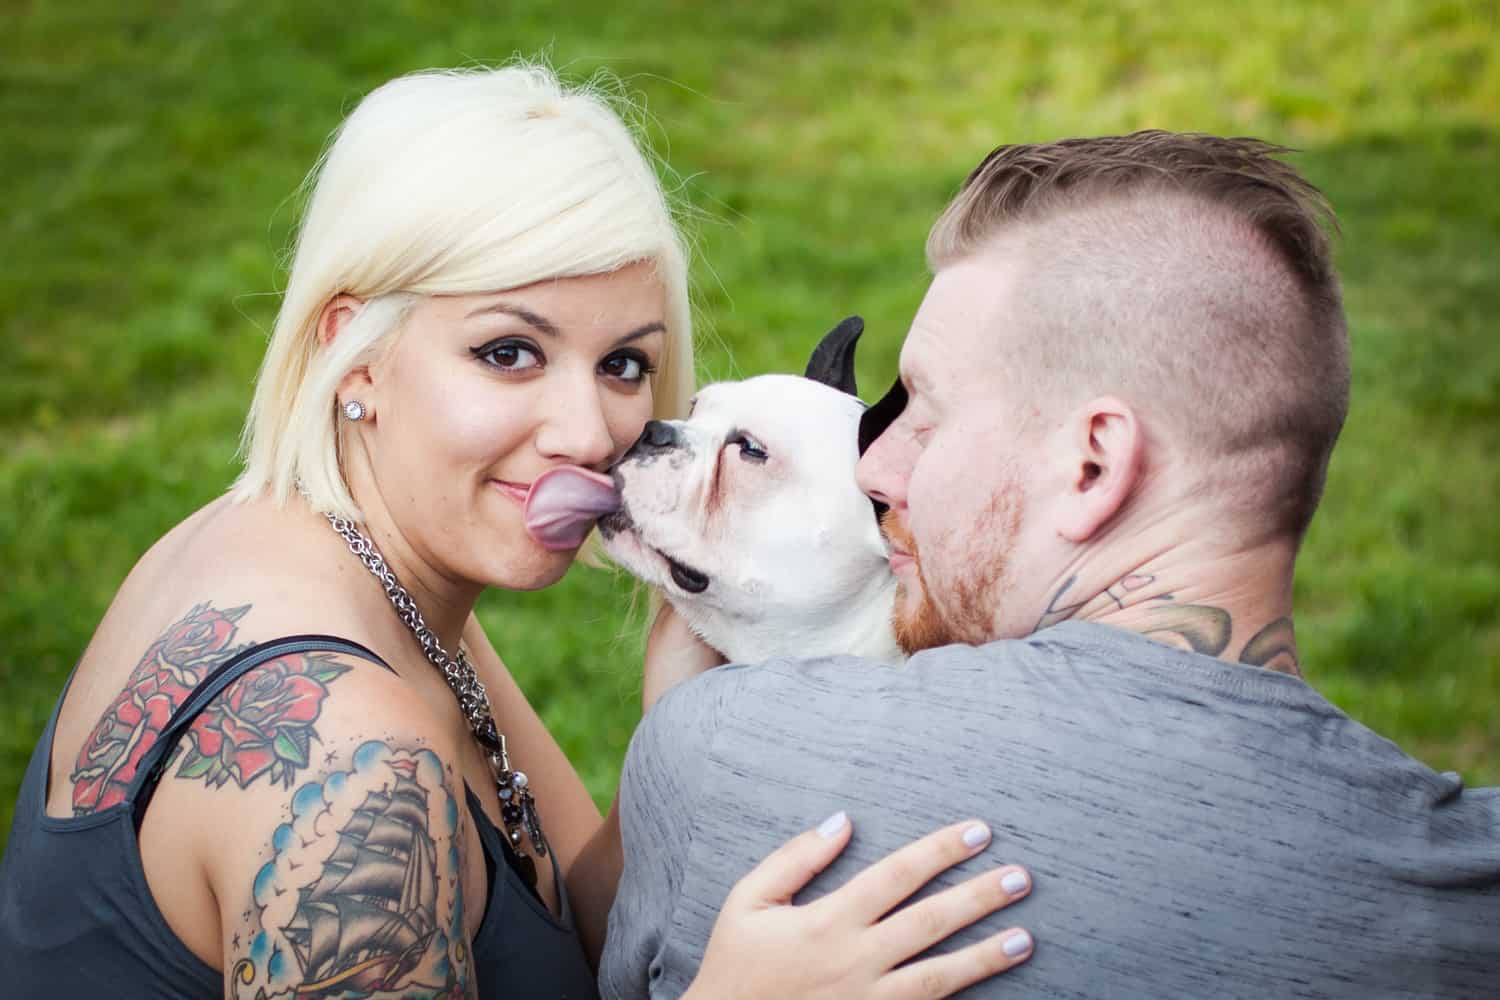 Dog licking blond woman with partner